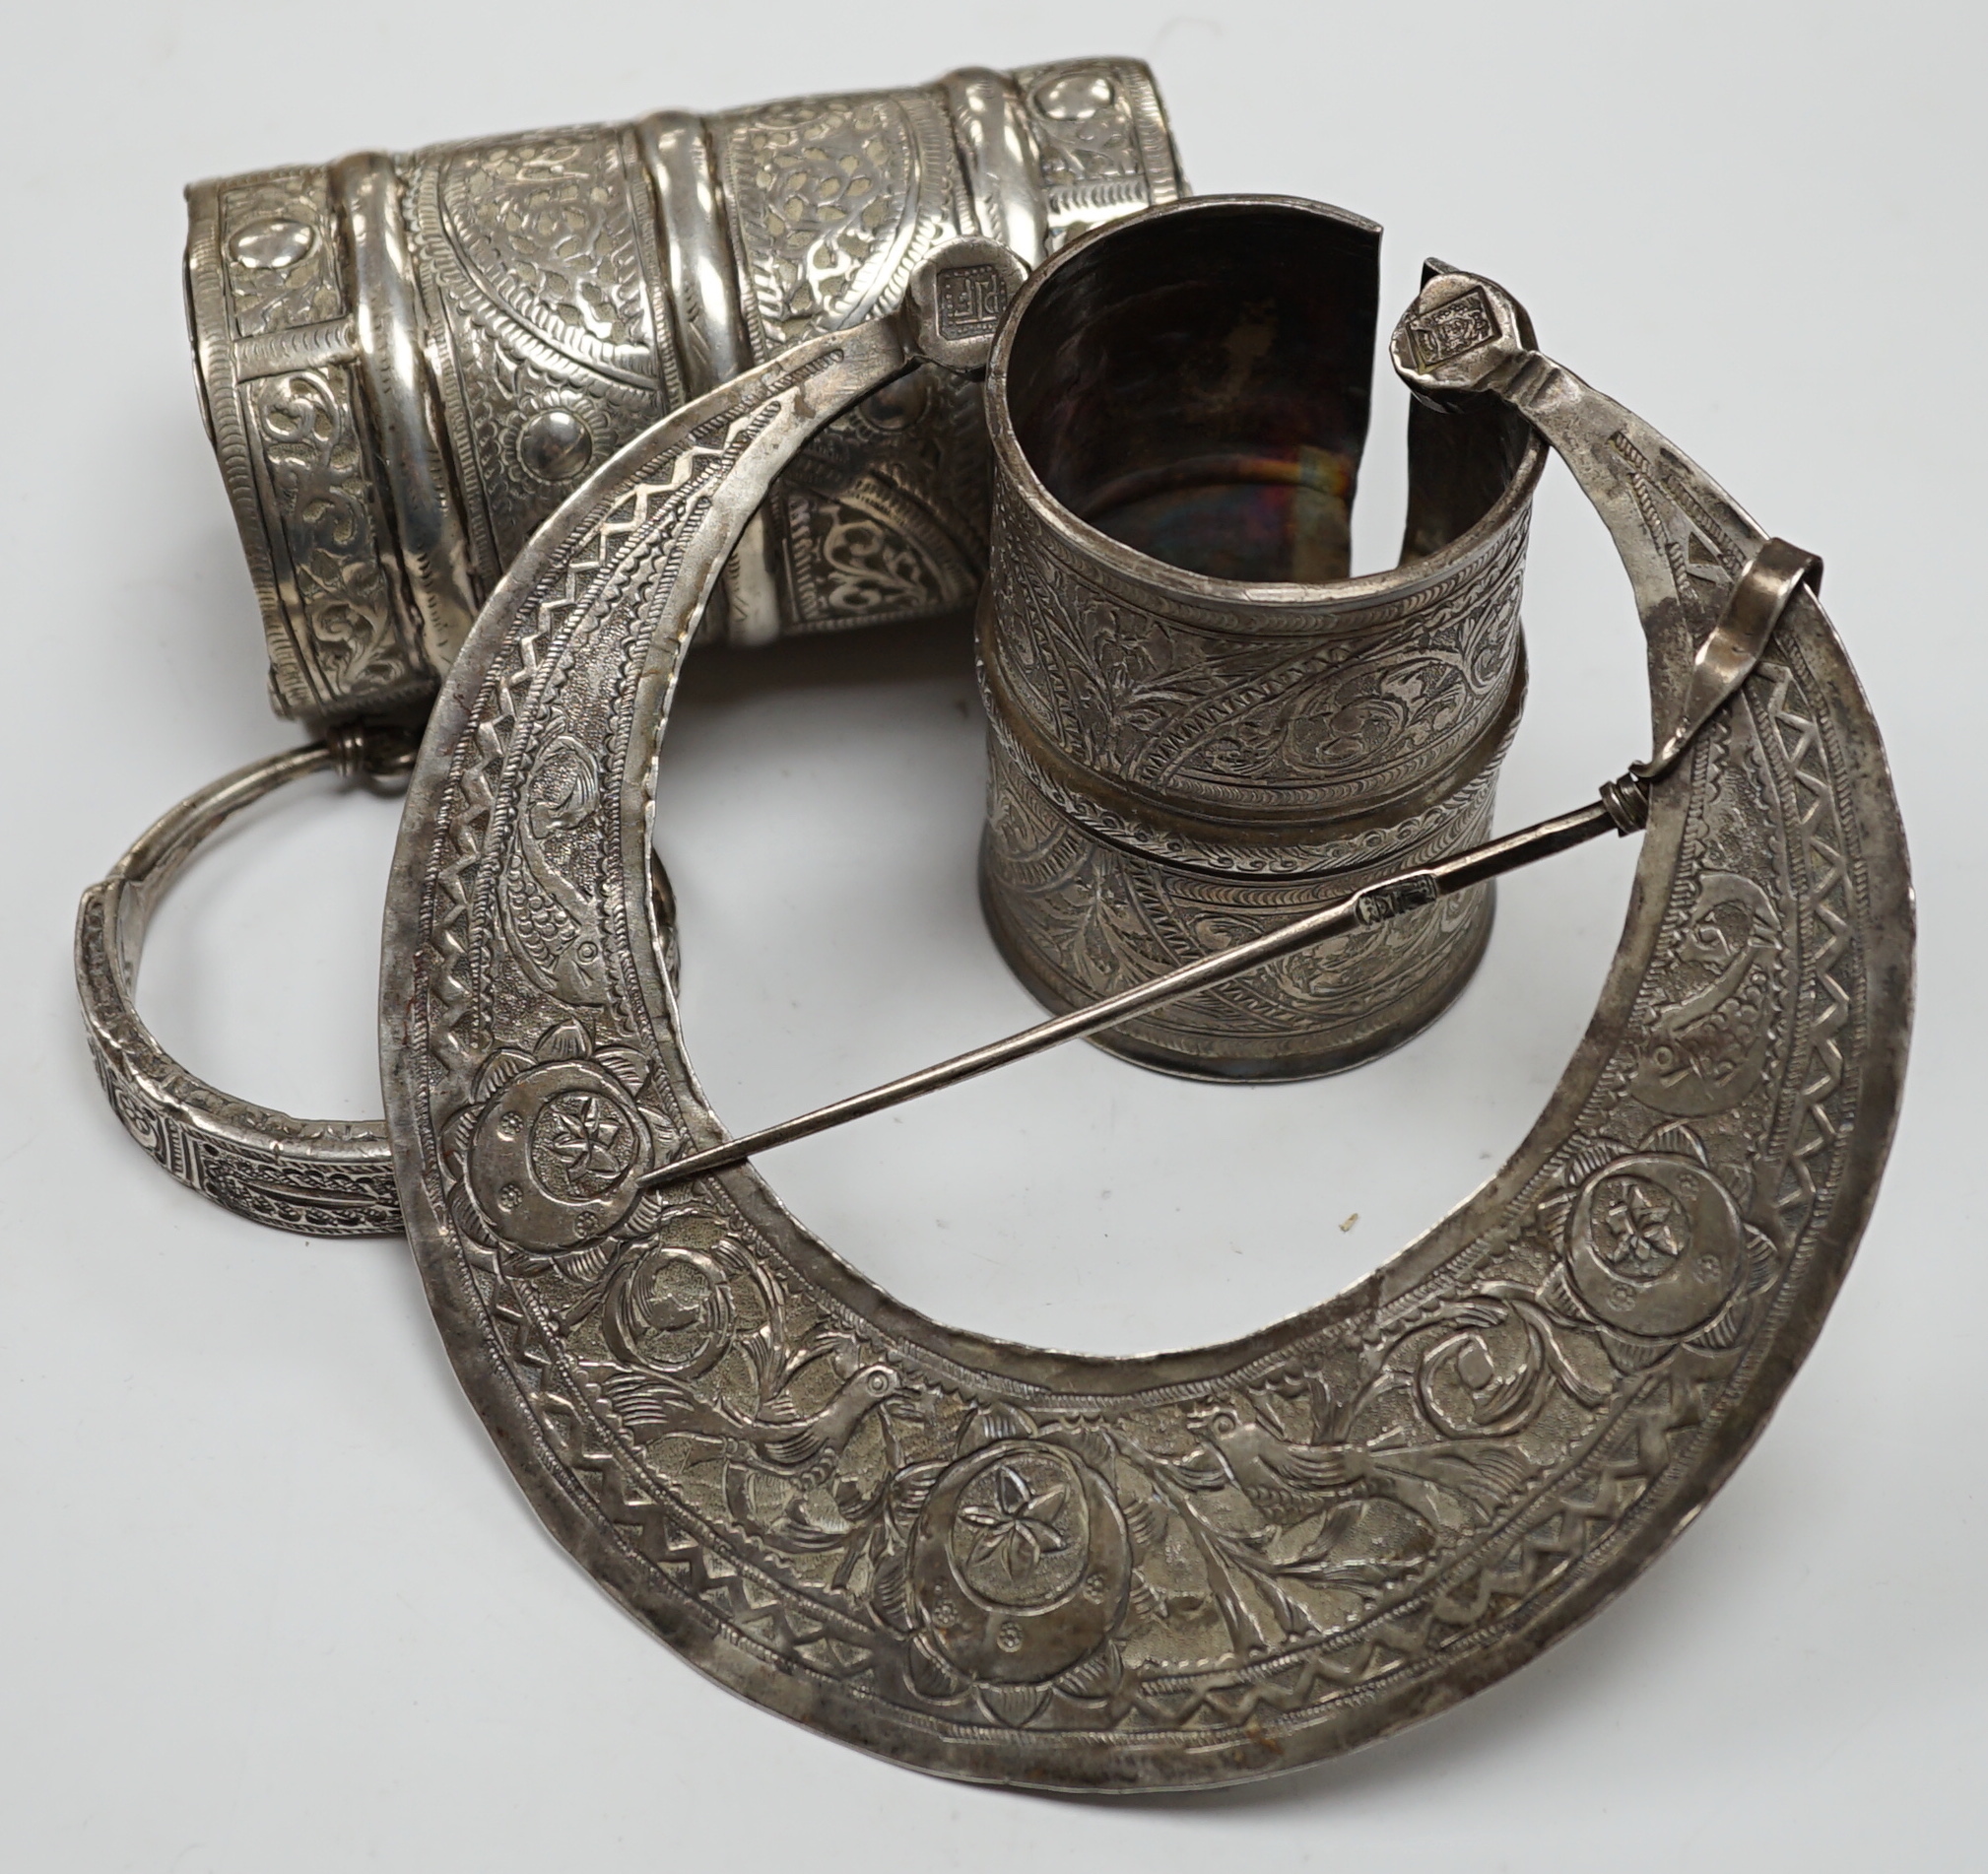 A collection of eight North African Berber white metal jewellery, etc, including bangles, cuffs and hair ornament.